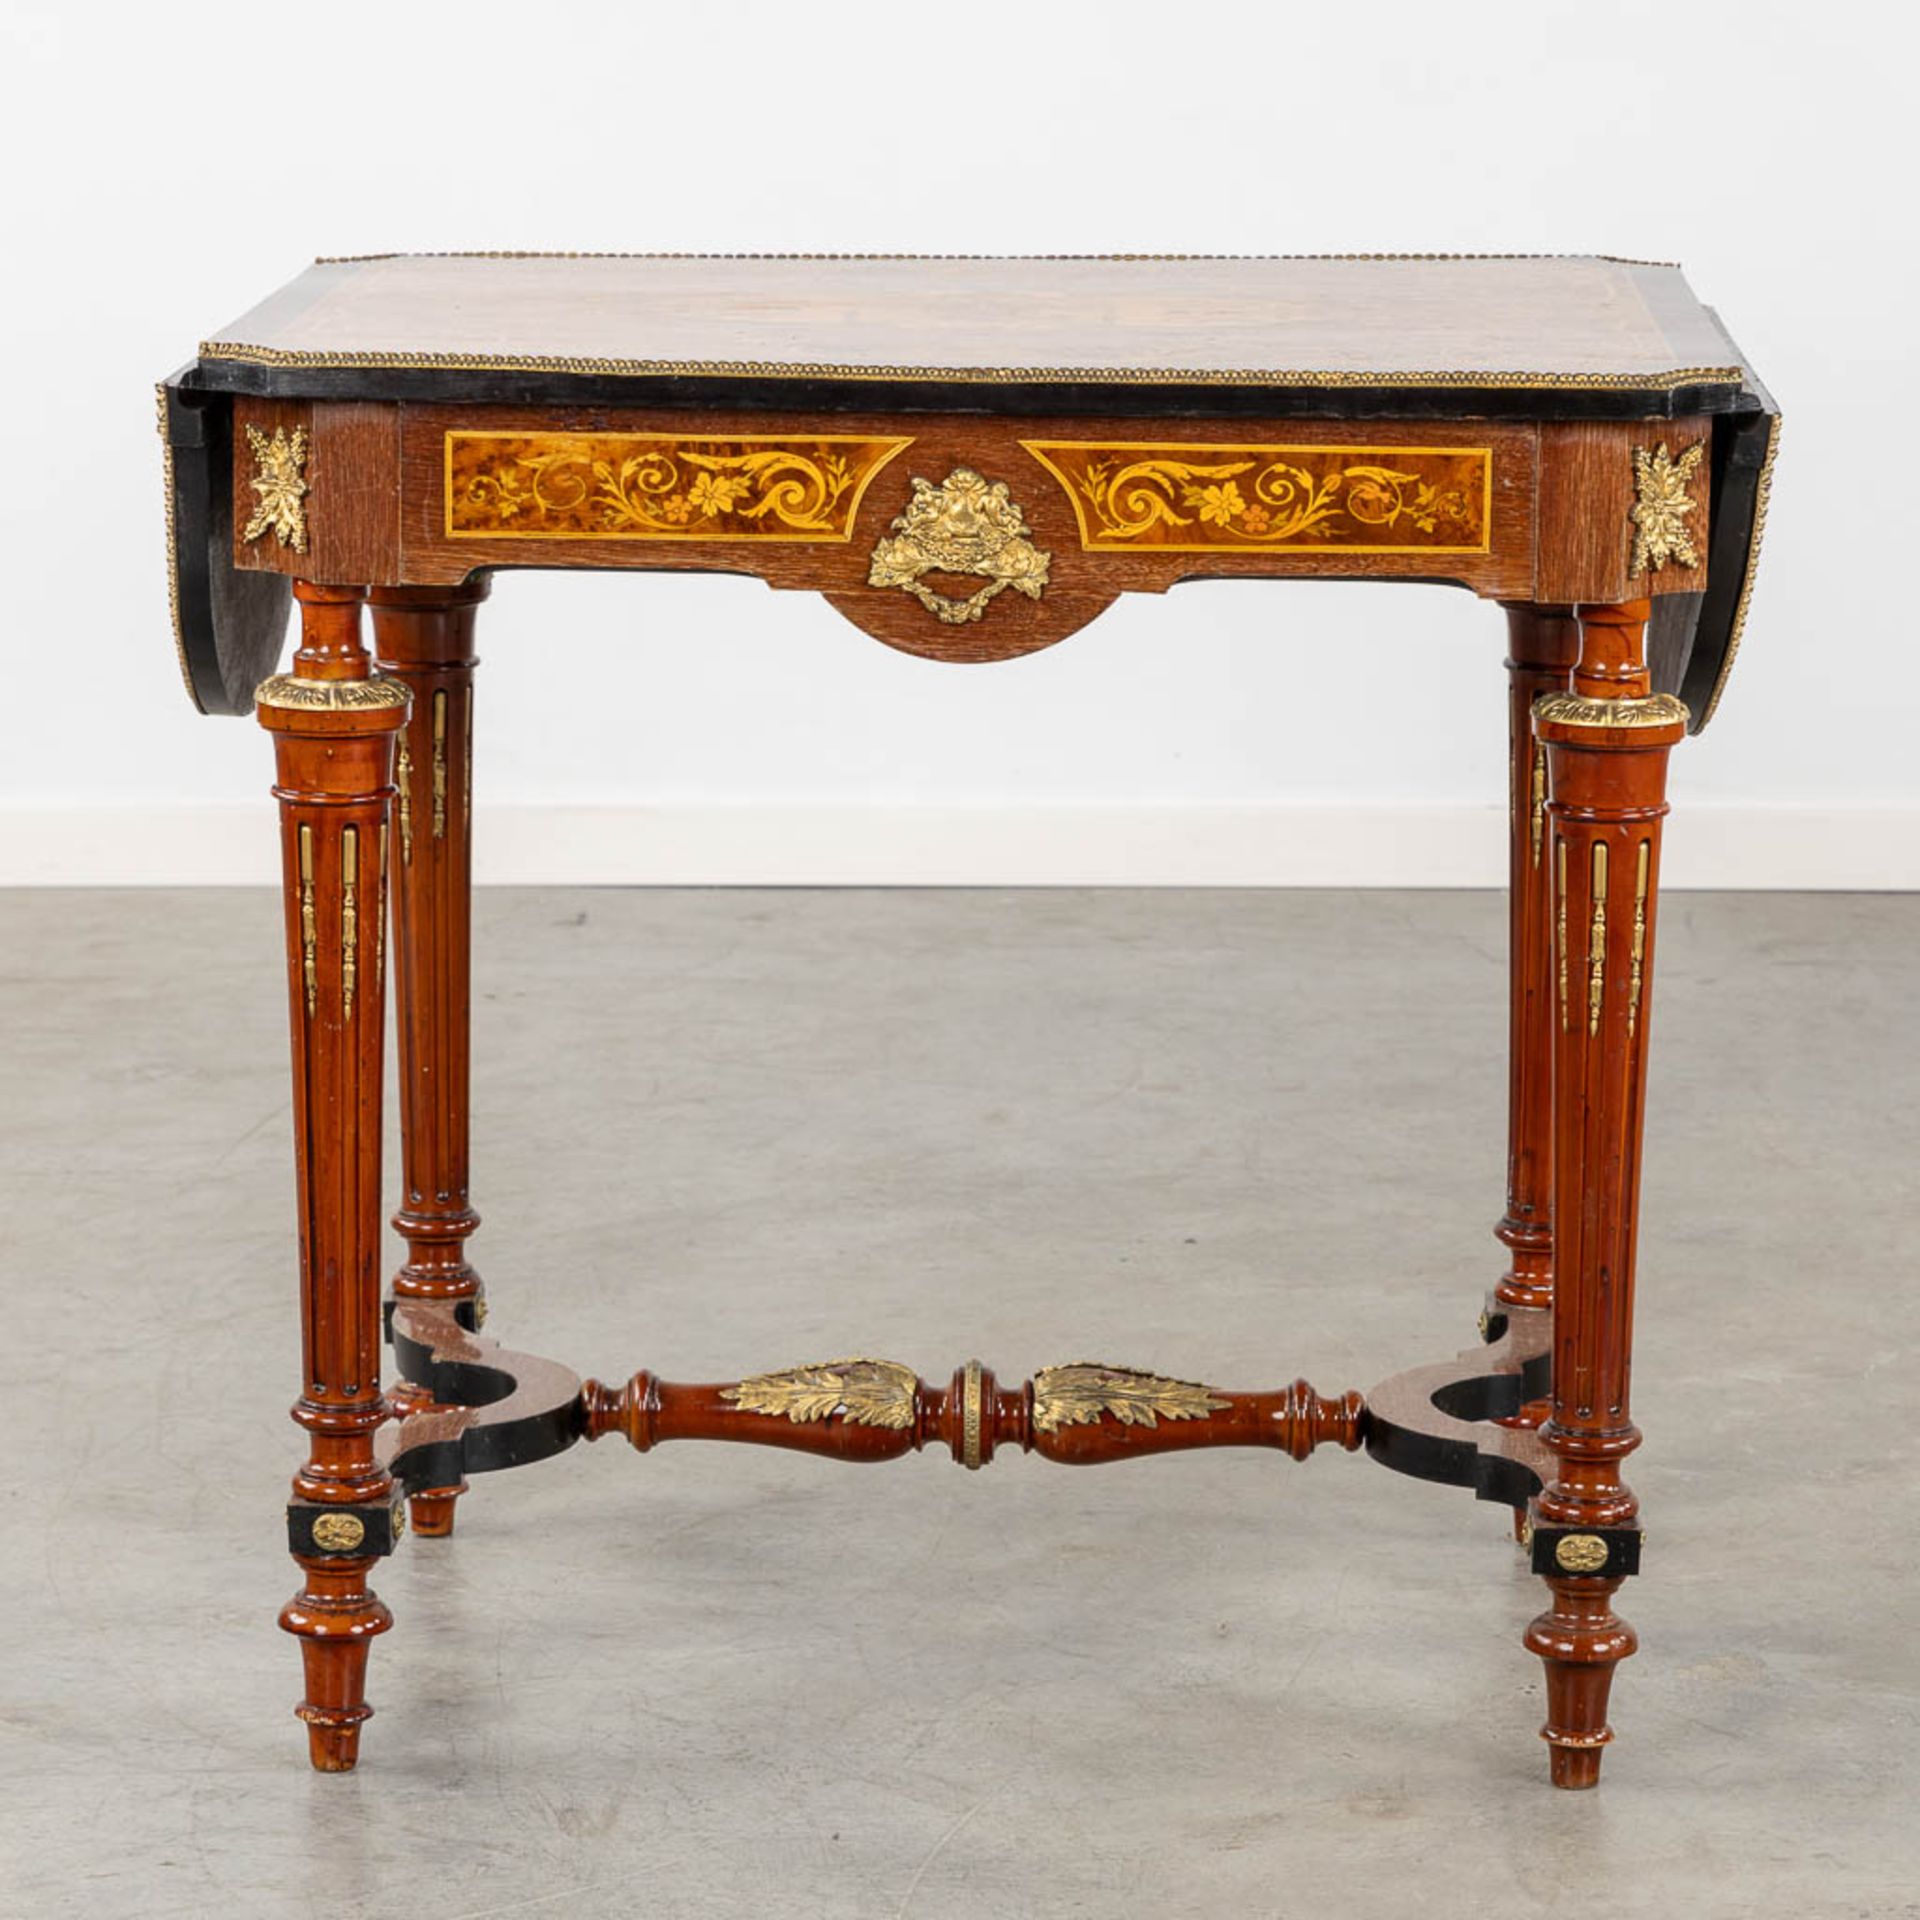 A side table/play table, marquetry inlay and mounted with bronze. 20th C. (L:57 x W:115 x H:74 cm) - Bild 7 aus 19